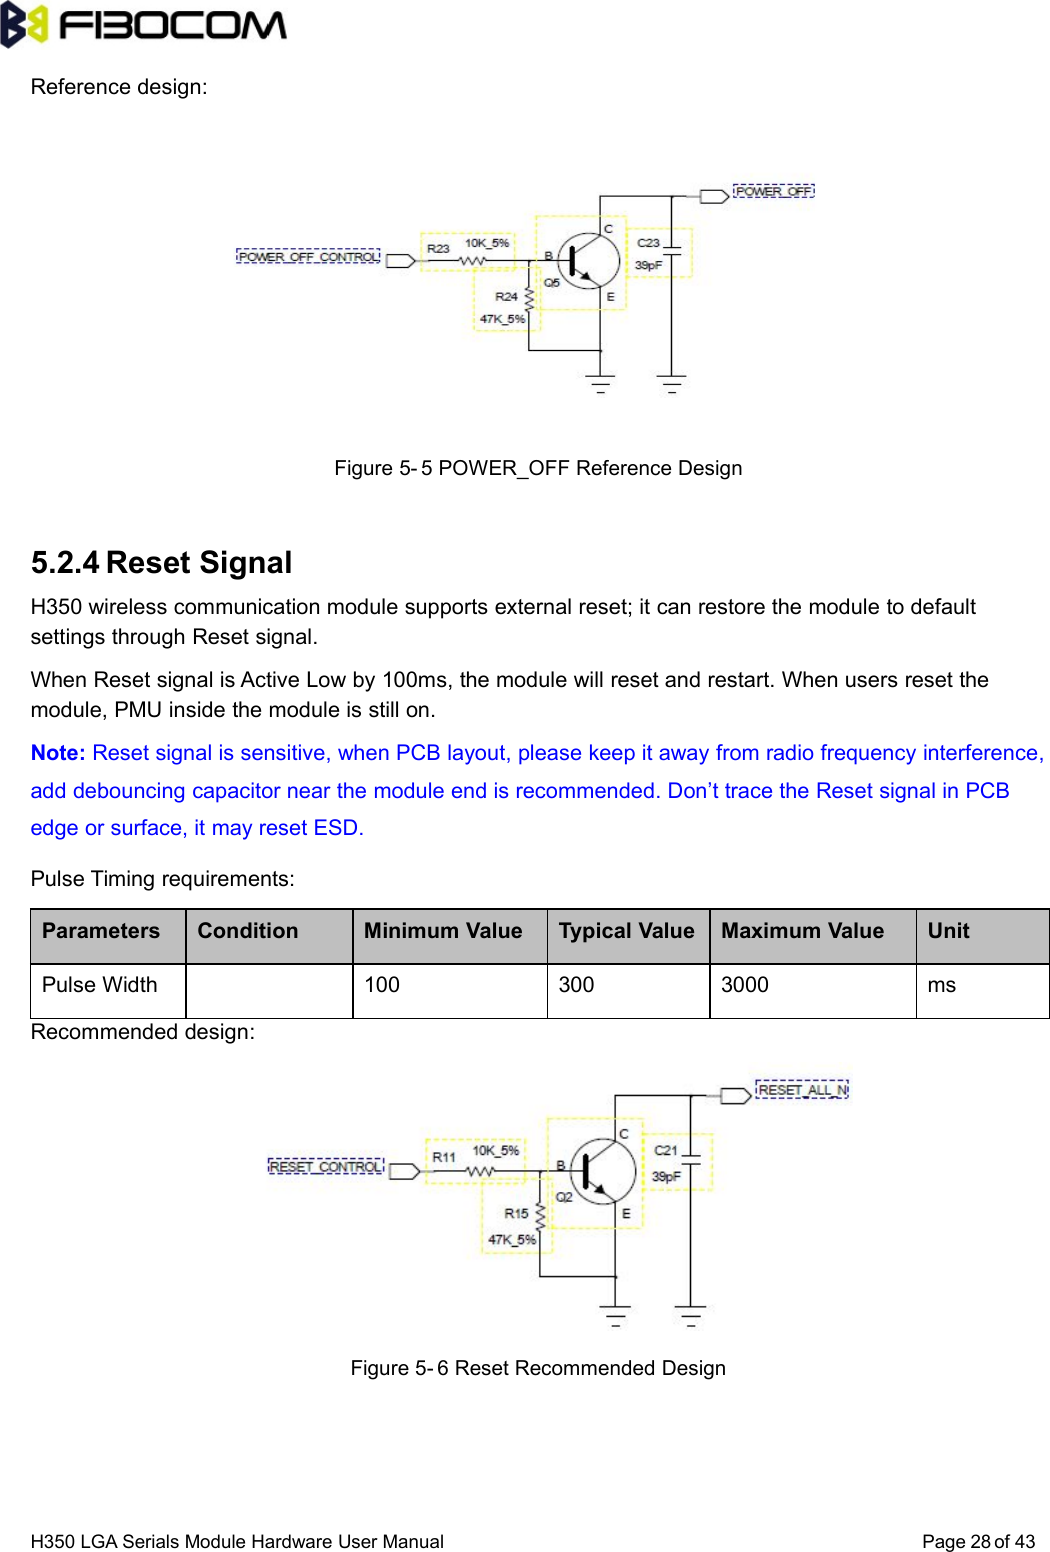 H350 LGA Serials Module Hardware User Manual Page of 4328Reference design:Figure 5- 5 POWER_OFF Reference Design5.2.4 Reset SignalH350 wireless communication module supports external reset; it can restore the module to defaultsettings through Reset signal.When Reset signal is Active Low by 100ms, the module will reset and restart. When users reset themodule, PMU inside the module is still on.Note: Reset signal is sensitive, when PCB layout, please keep it away from radio frequency interference,add debouncing capacitor near the module end is recommended. Don’t trace the Reset signal in PCBedge or surface, it may reset ESD.Pulse Timing requirements:Parameters Condition Minimum Value Typical Value Maximum Value UnitPulse Width 100 300 3000 msRecommended design:Figure 5- 6 Reset Recommended Design